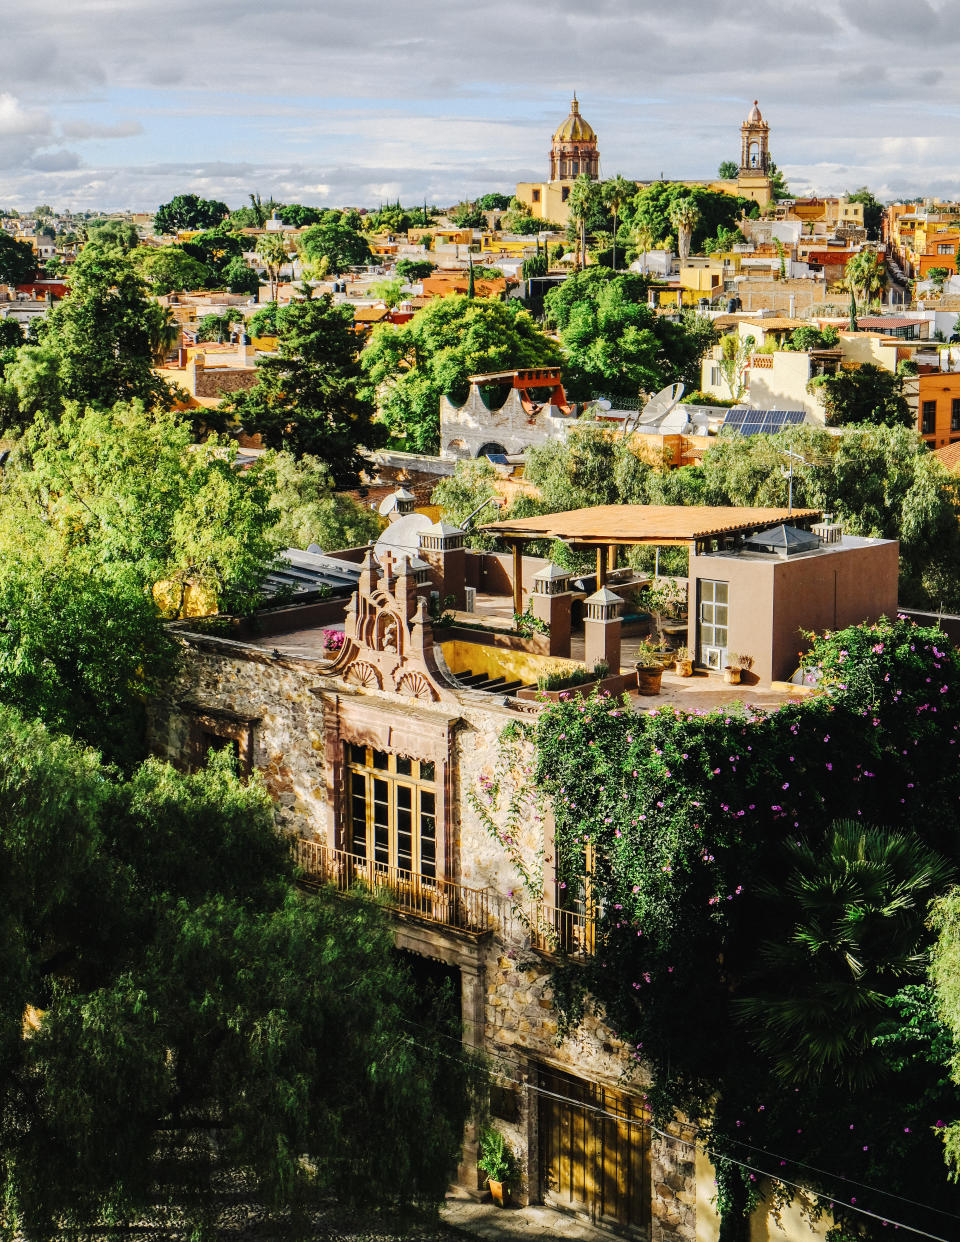 Our complete guide on where to stay, eat, and play in San Miguel de Allende